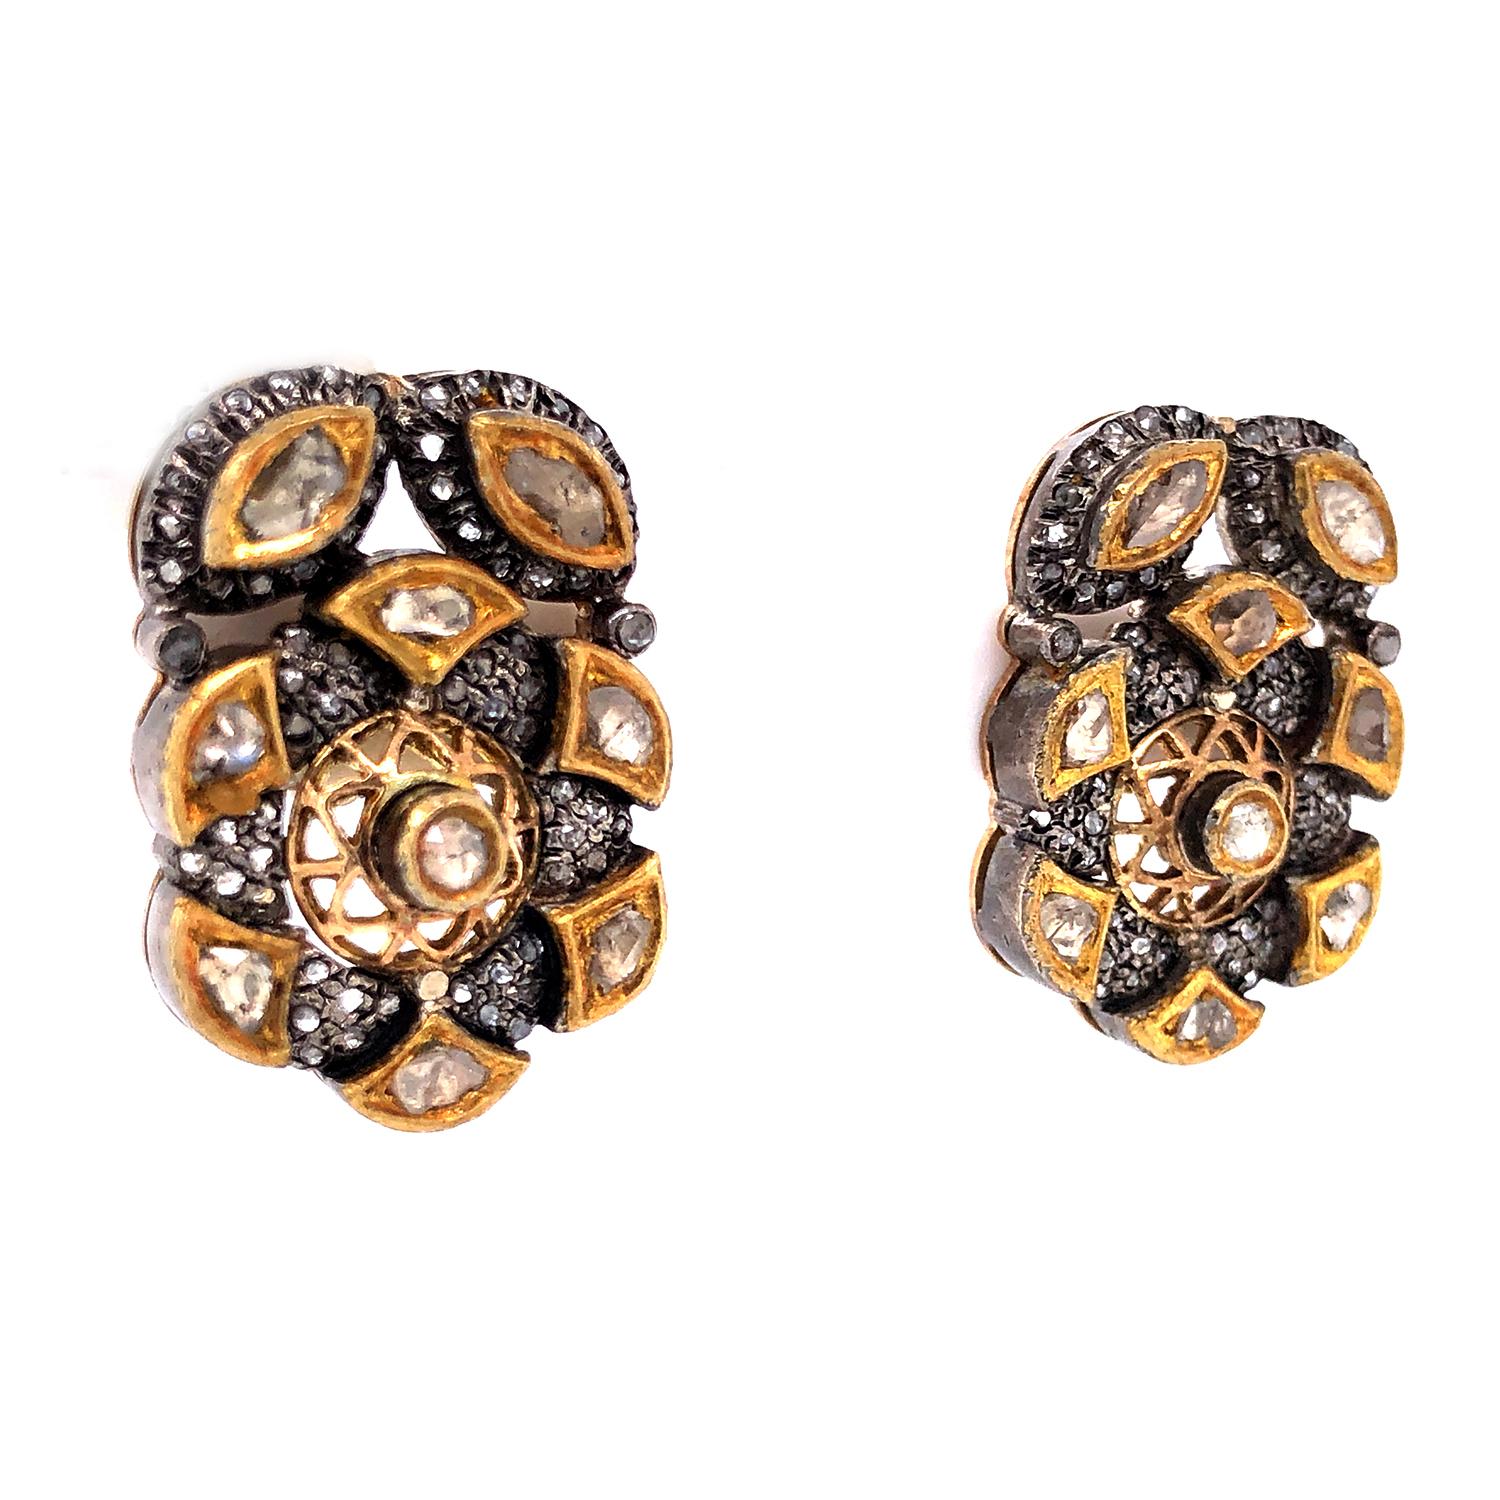 Artisan Rose Cut Diamonds Studs With Filigree Work Made In Silver & 18k Gold For Sale